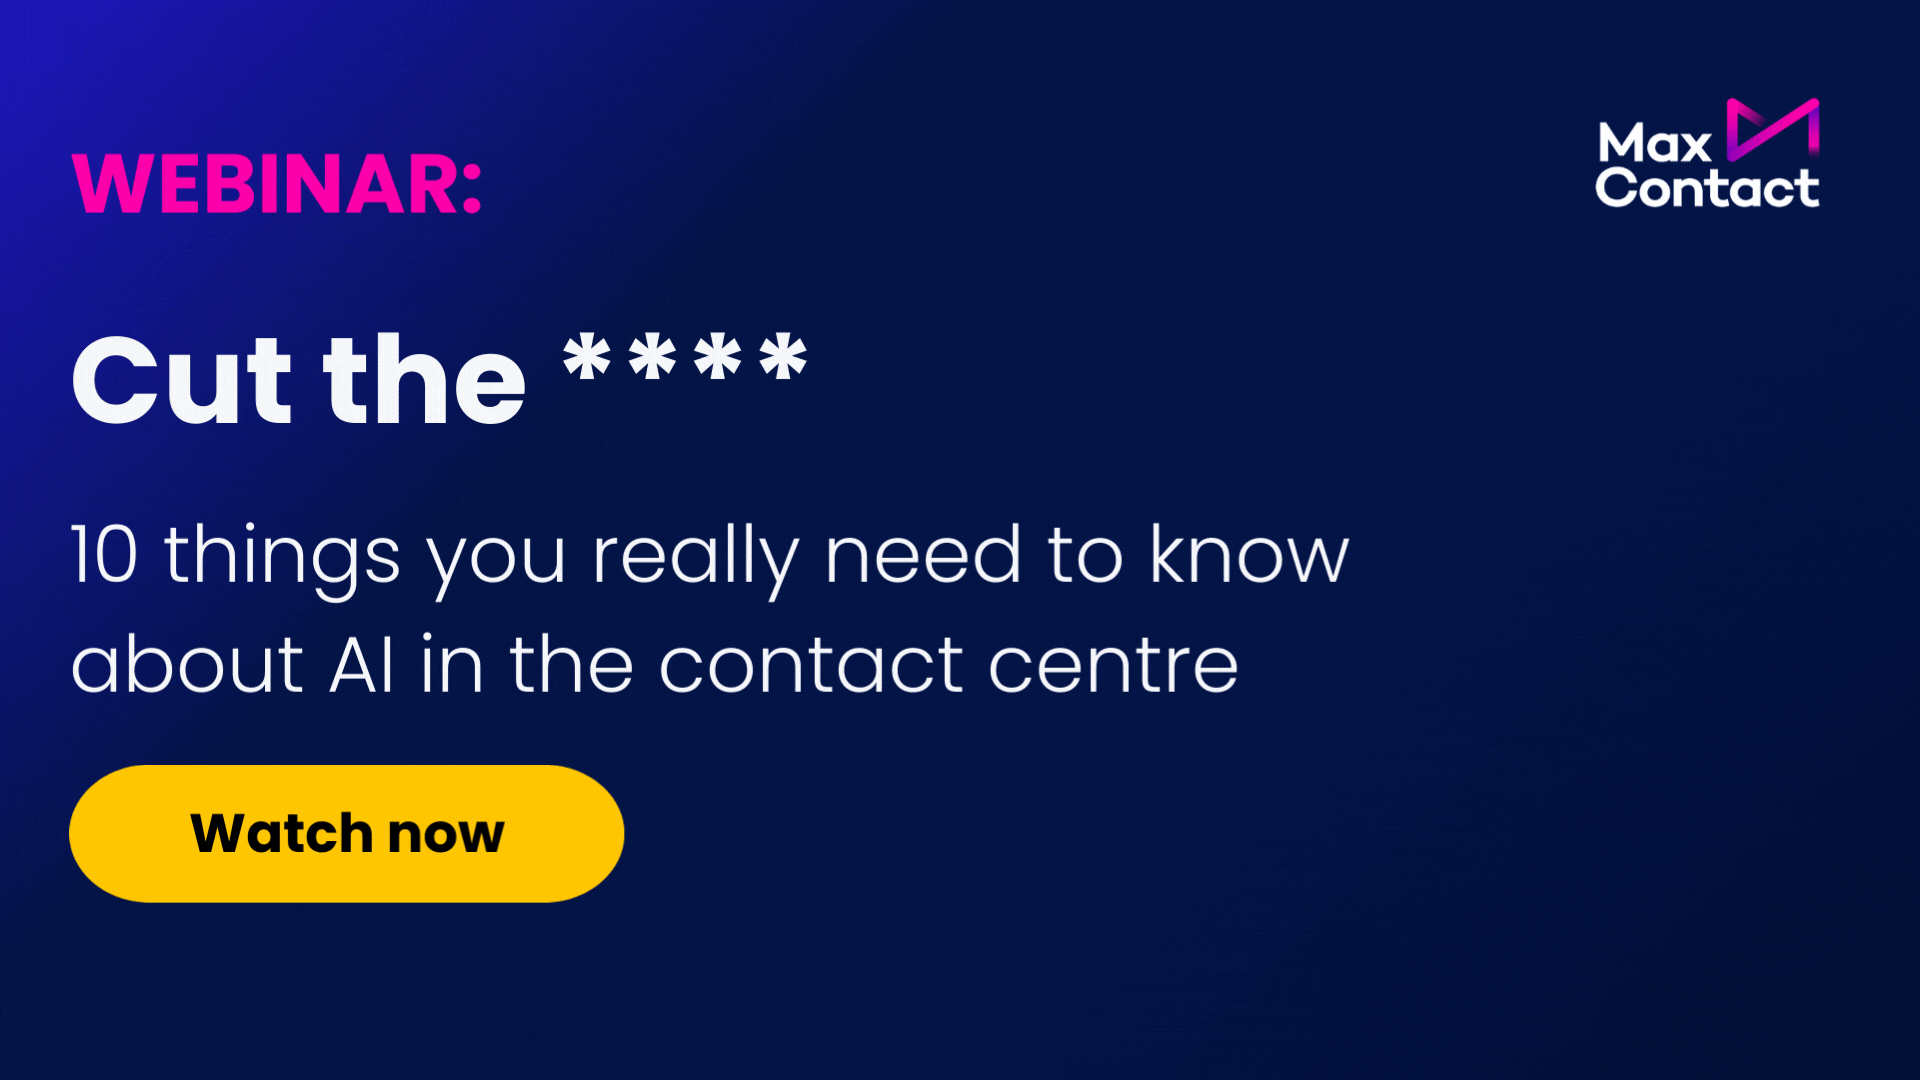 10 Things you really need to know about AI in the contact centre webinar